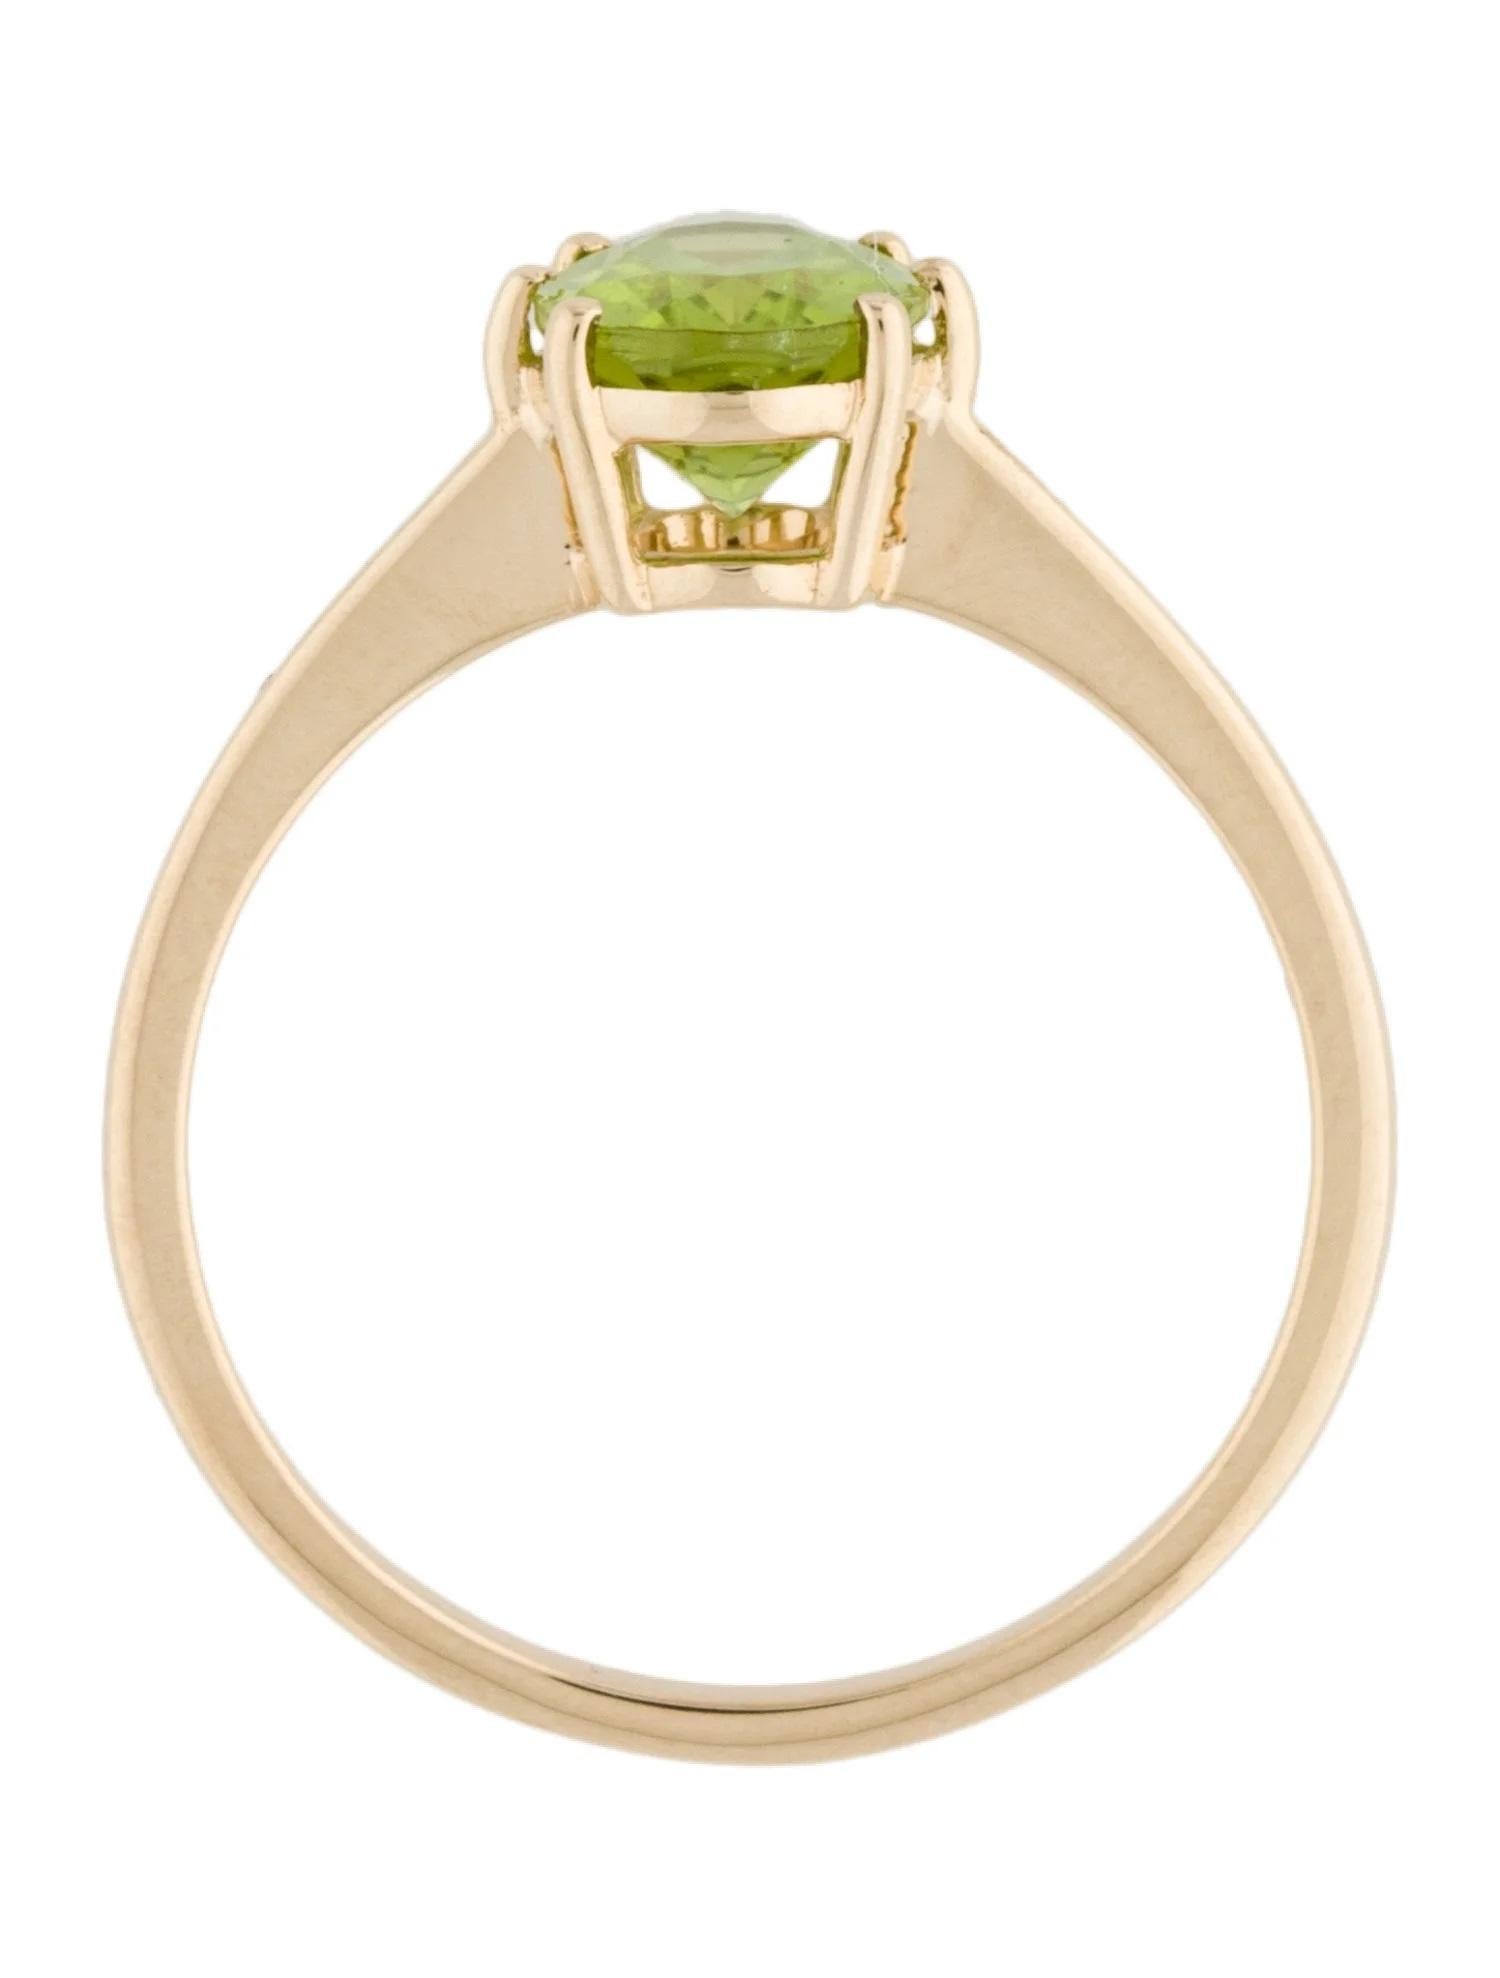 14K 1.36ct Peridot Cocktail Ring Size 6.75  Oval Modified Brilliant Gemstone In New Condition For Sale In Holtsville, NY